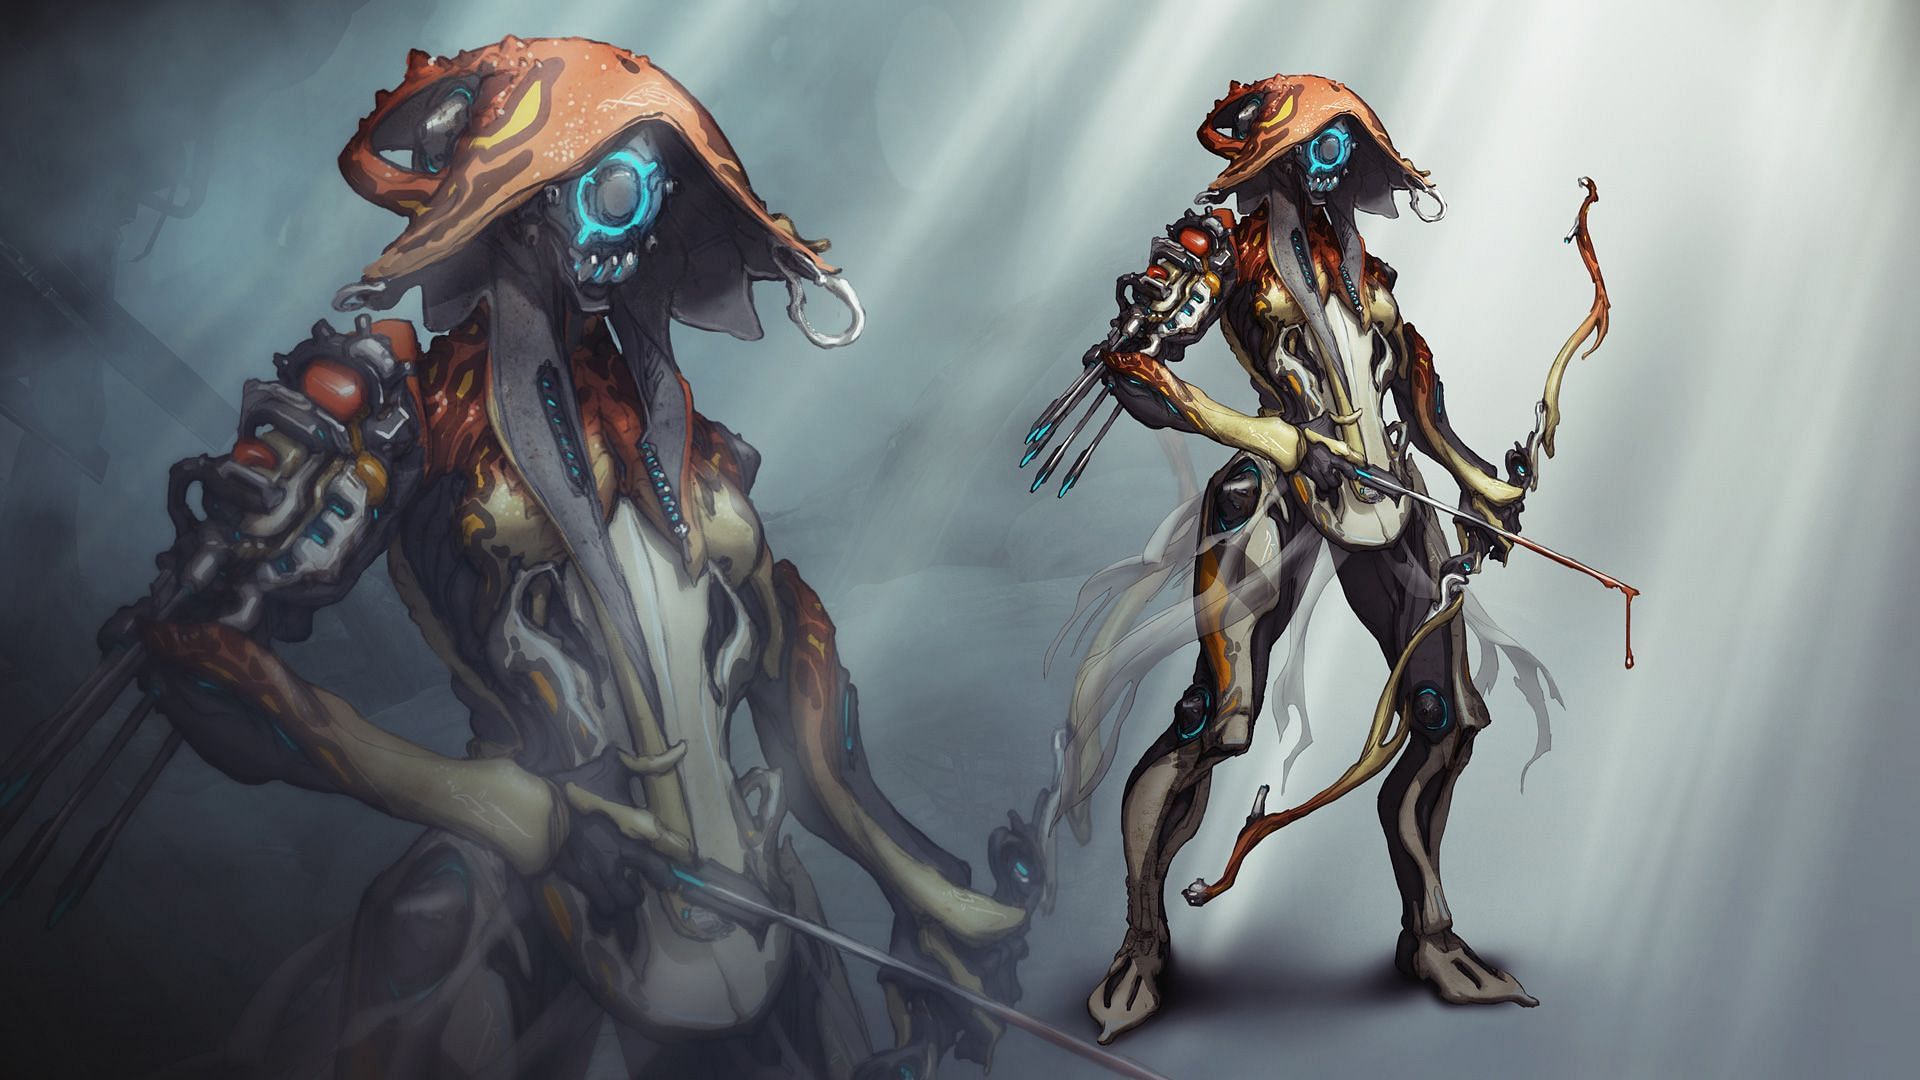 Ivara can infiltrate through laser barriers easily. (Image via Digital Extremes)